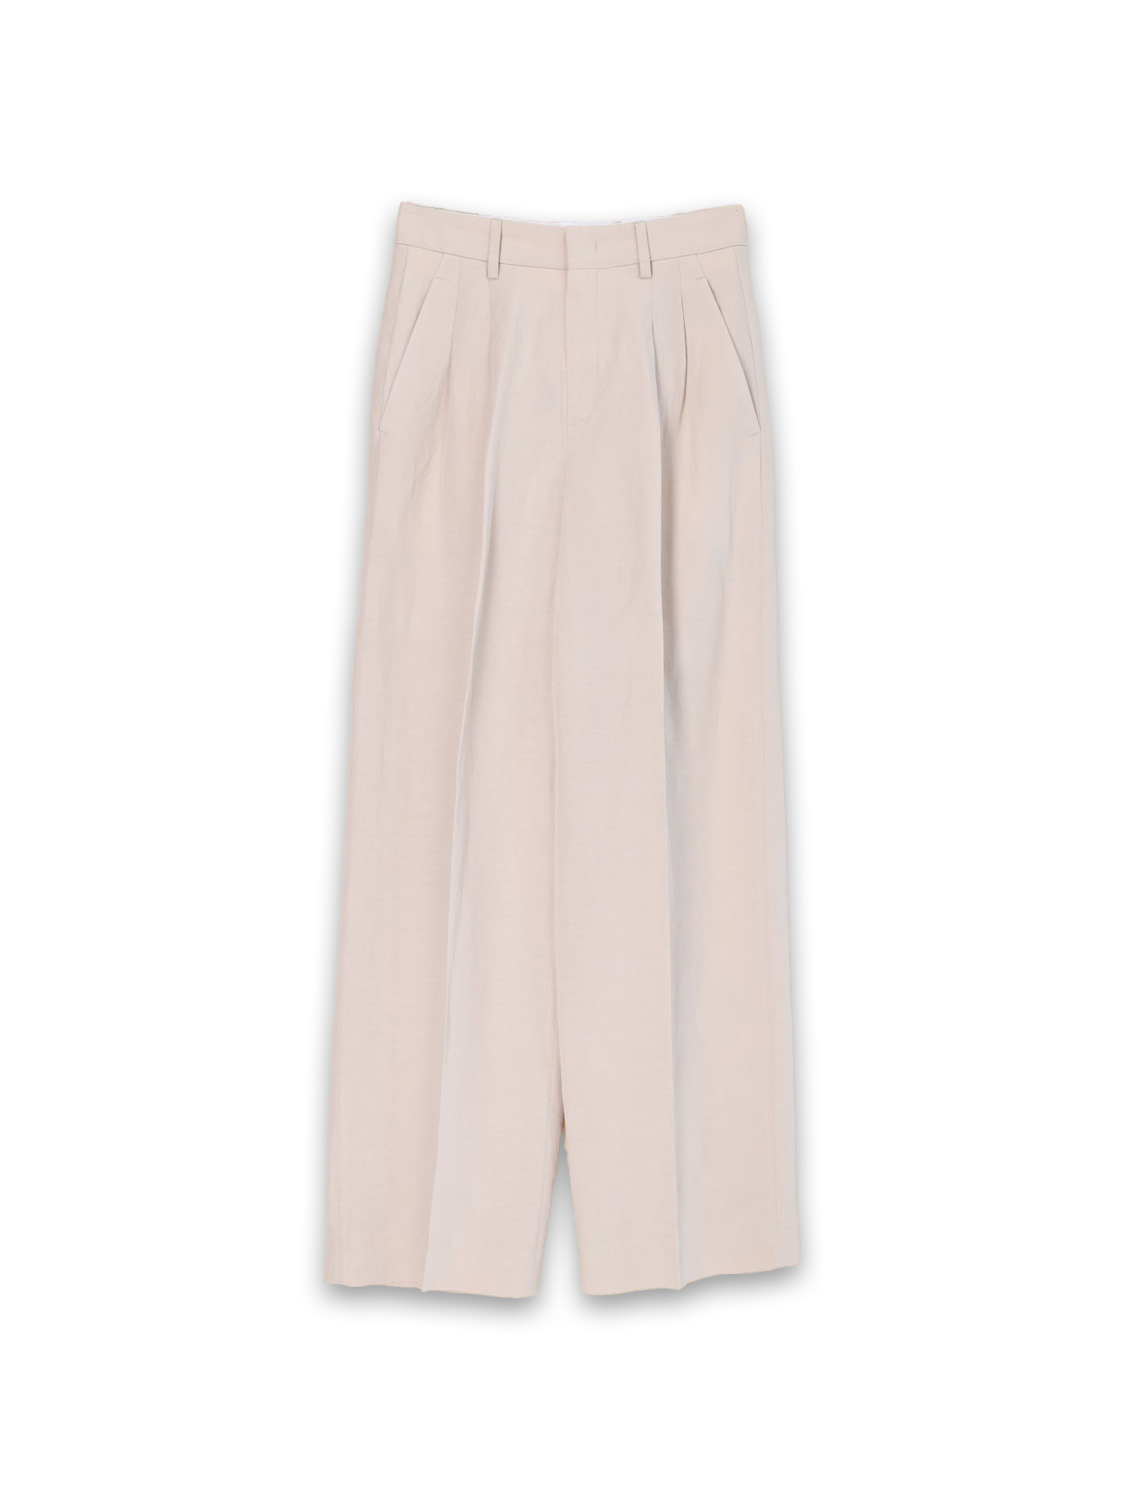 Noa – pleated trousers made from a linen blend 